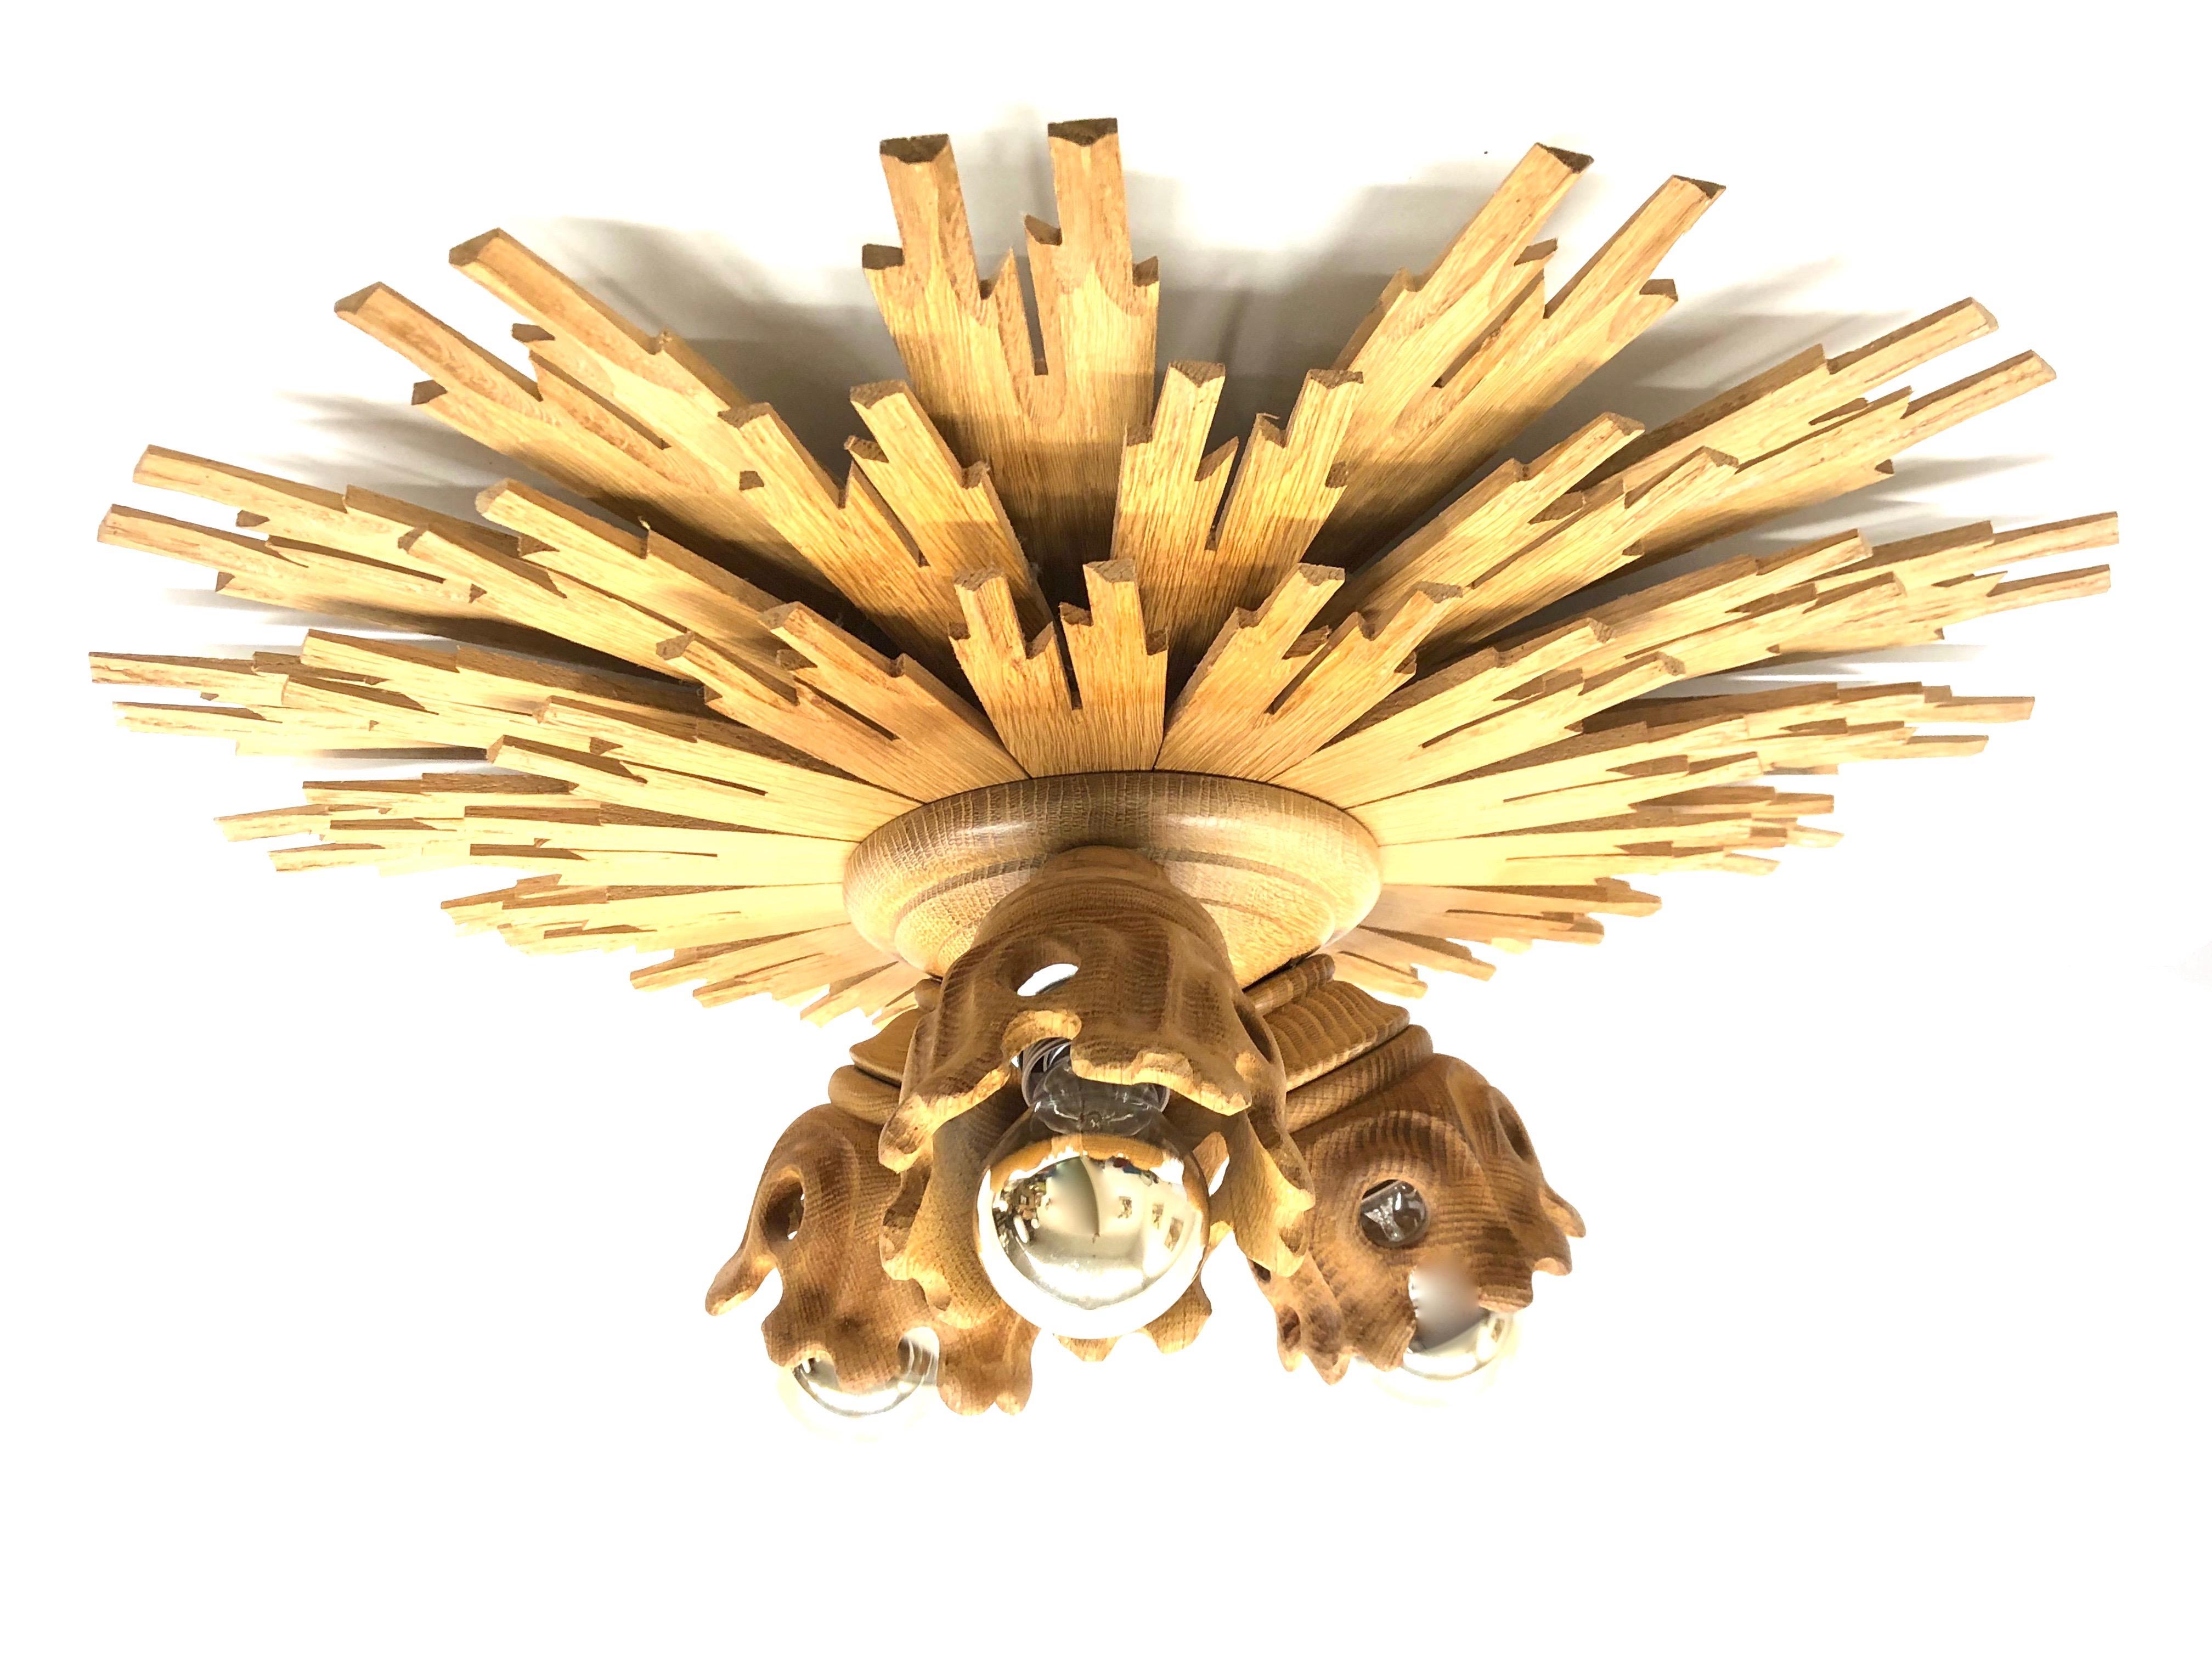 Beautiful large wooden handcrafted flush mount. Made in Germany by a wood worker. Gorgeous sunburst starburst flush mount with 3 lights. The fixture requires three European E27 / 110 Volt Edison bulbs, each bulb up to 60 watts.